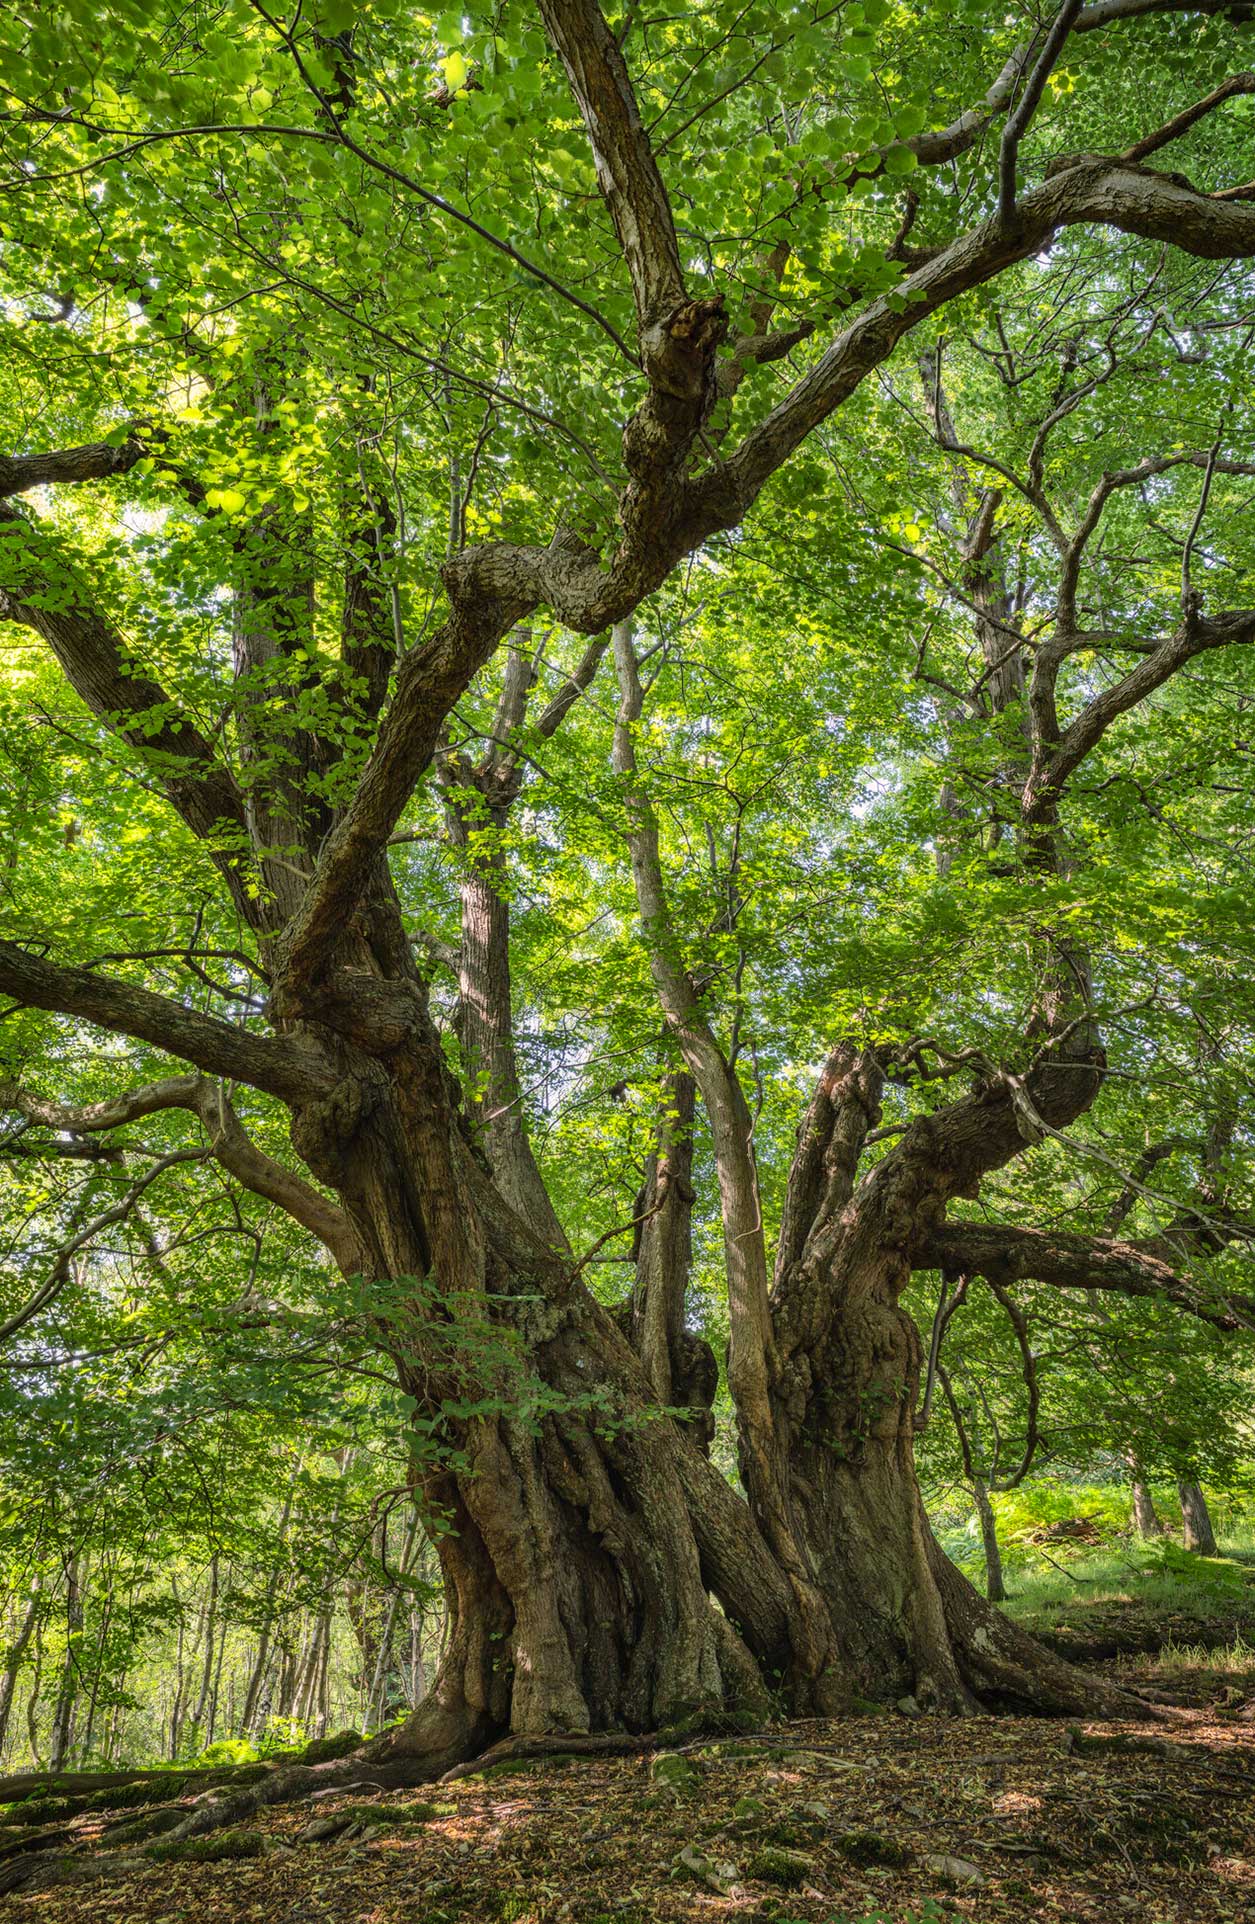 Large ancient tree with a sprawling canopy among a woodland. Credit Lizzie Shepherd.